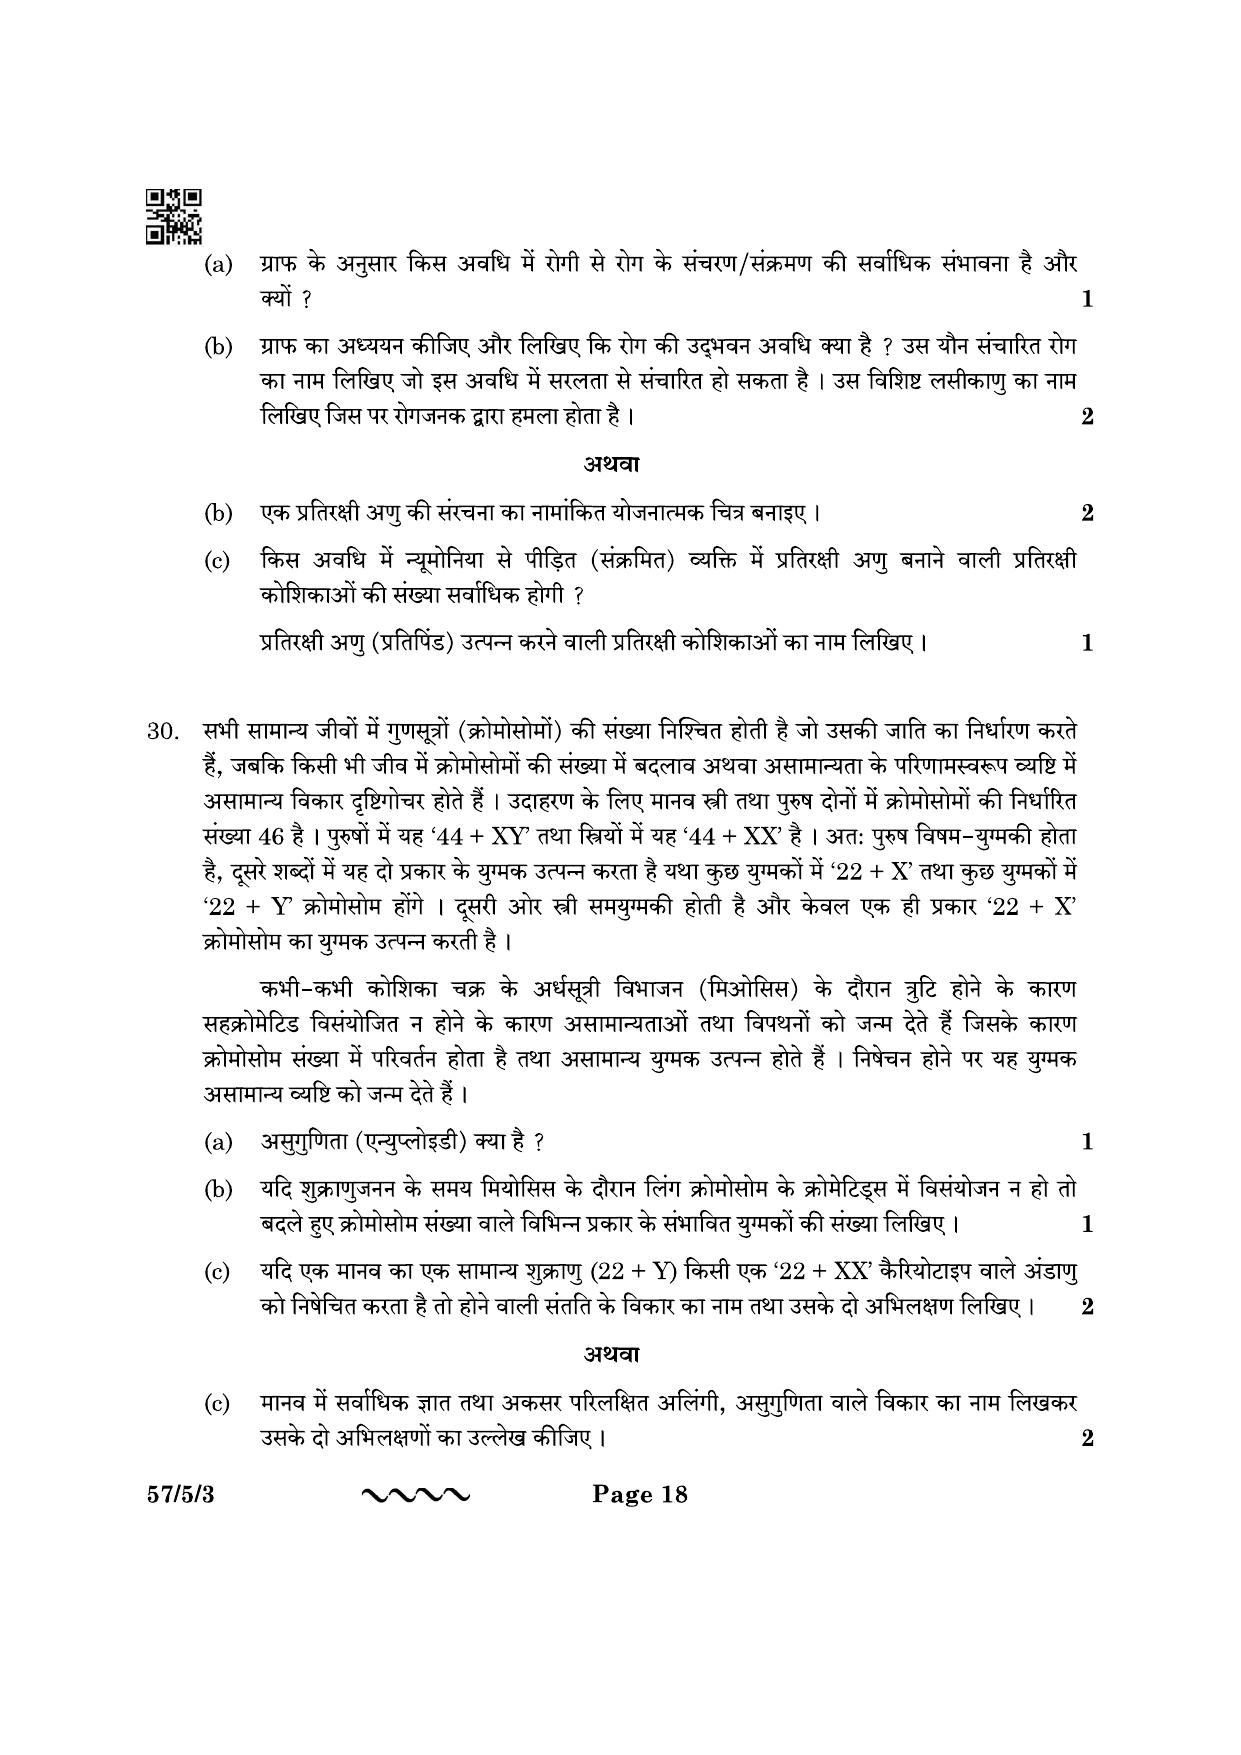 CBSE Class 12 57-5-3 Biology 2023 Question Paper - Page 18